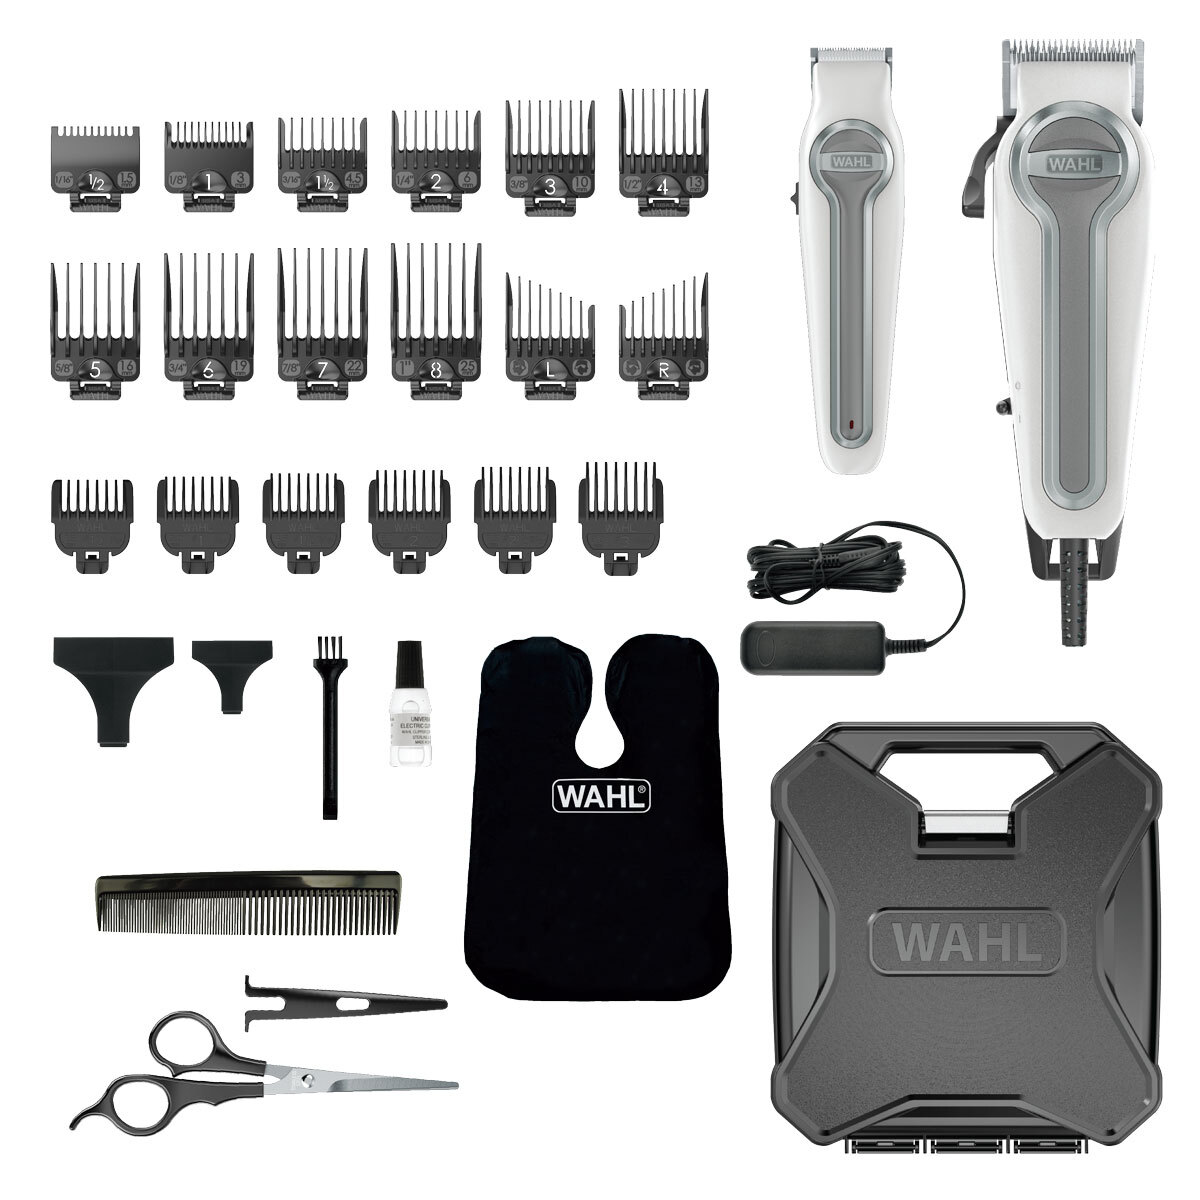 Wahl Elite Pro Hair Clipper and Trimmer Kit in White